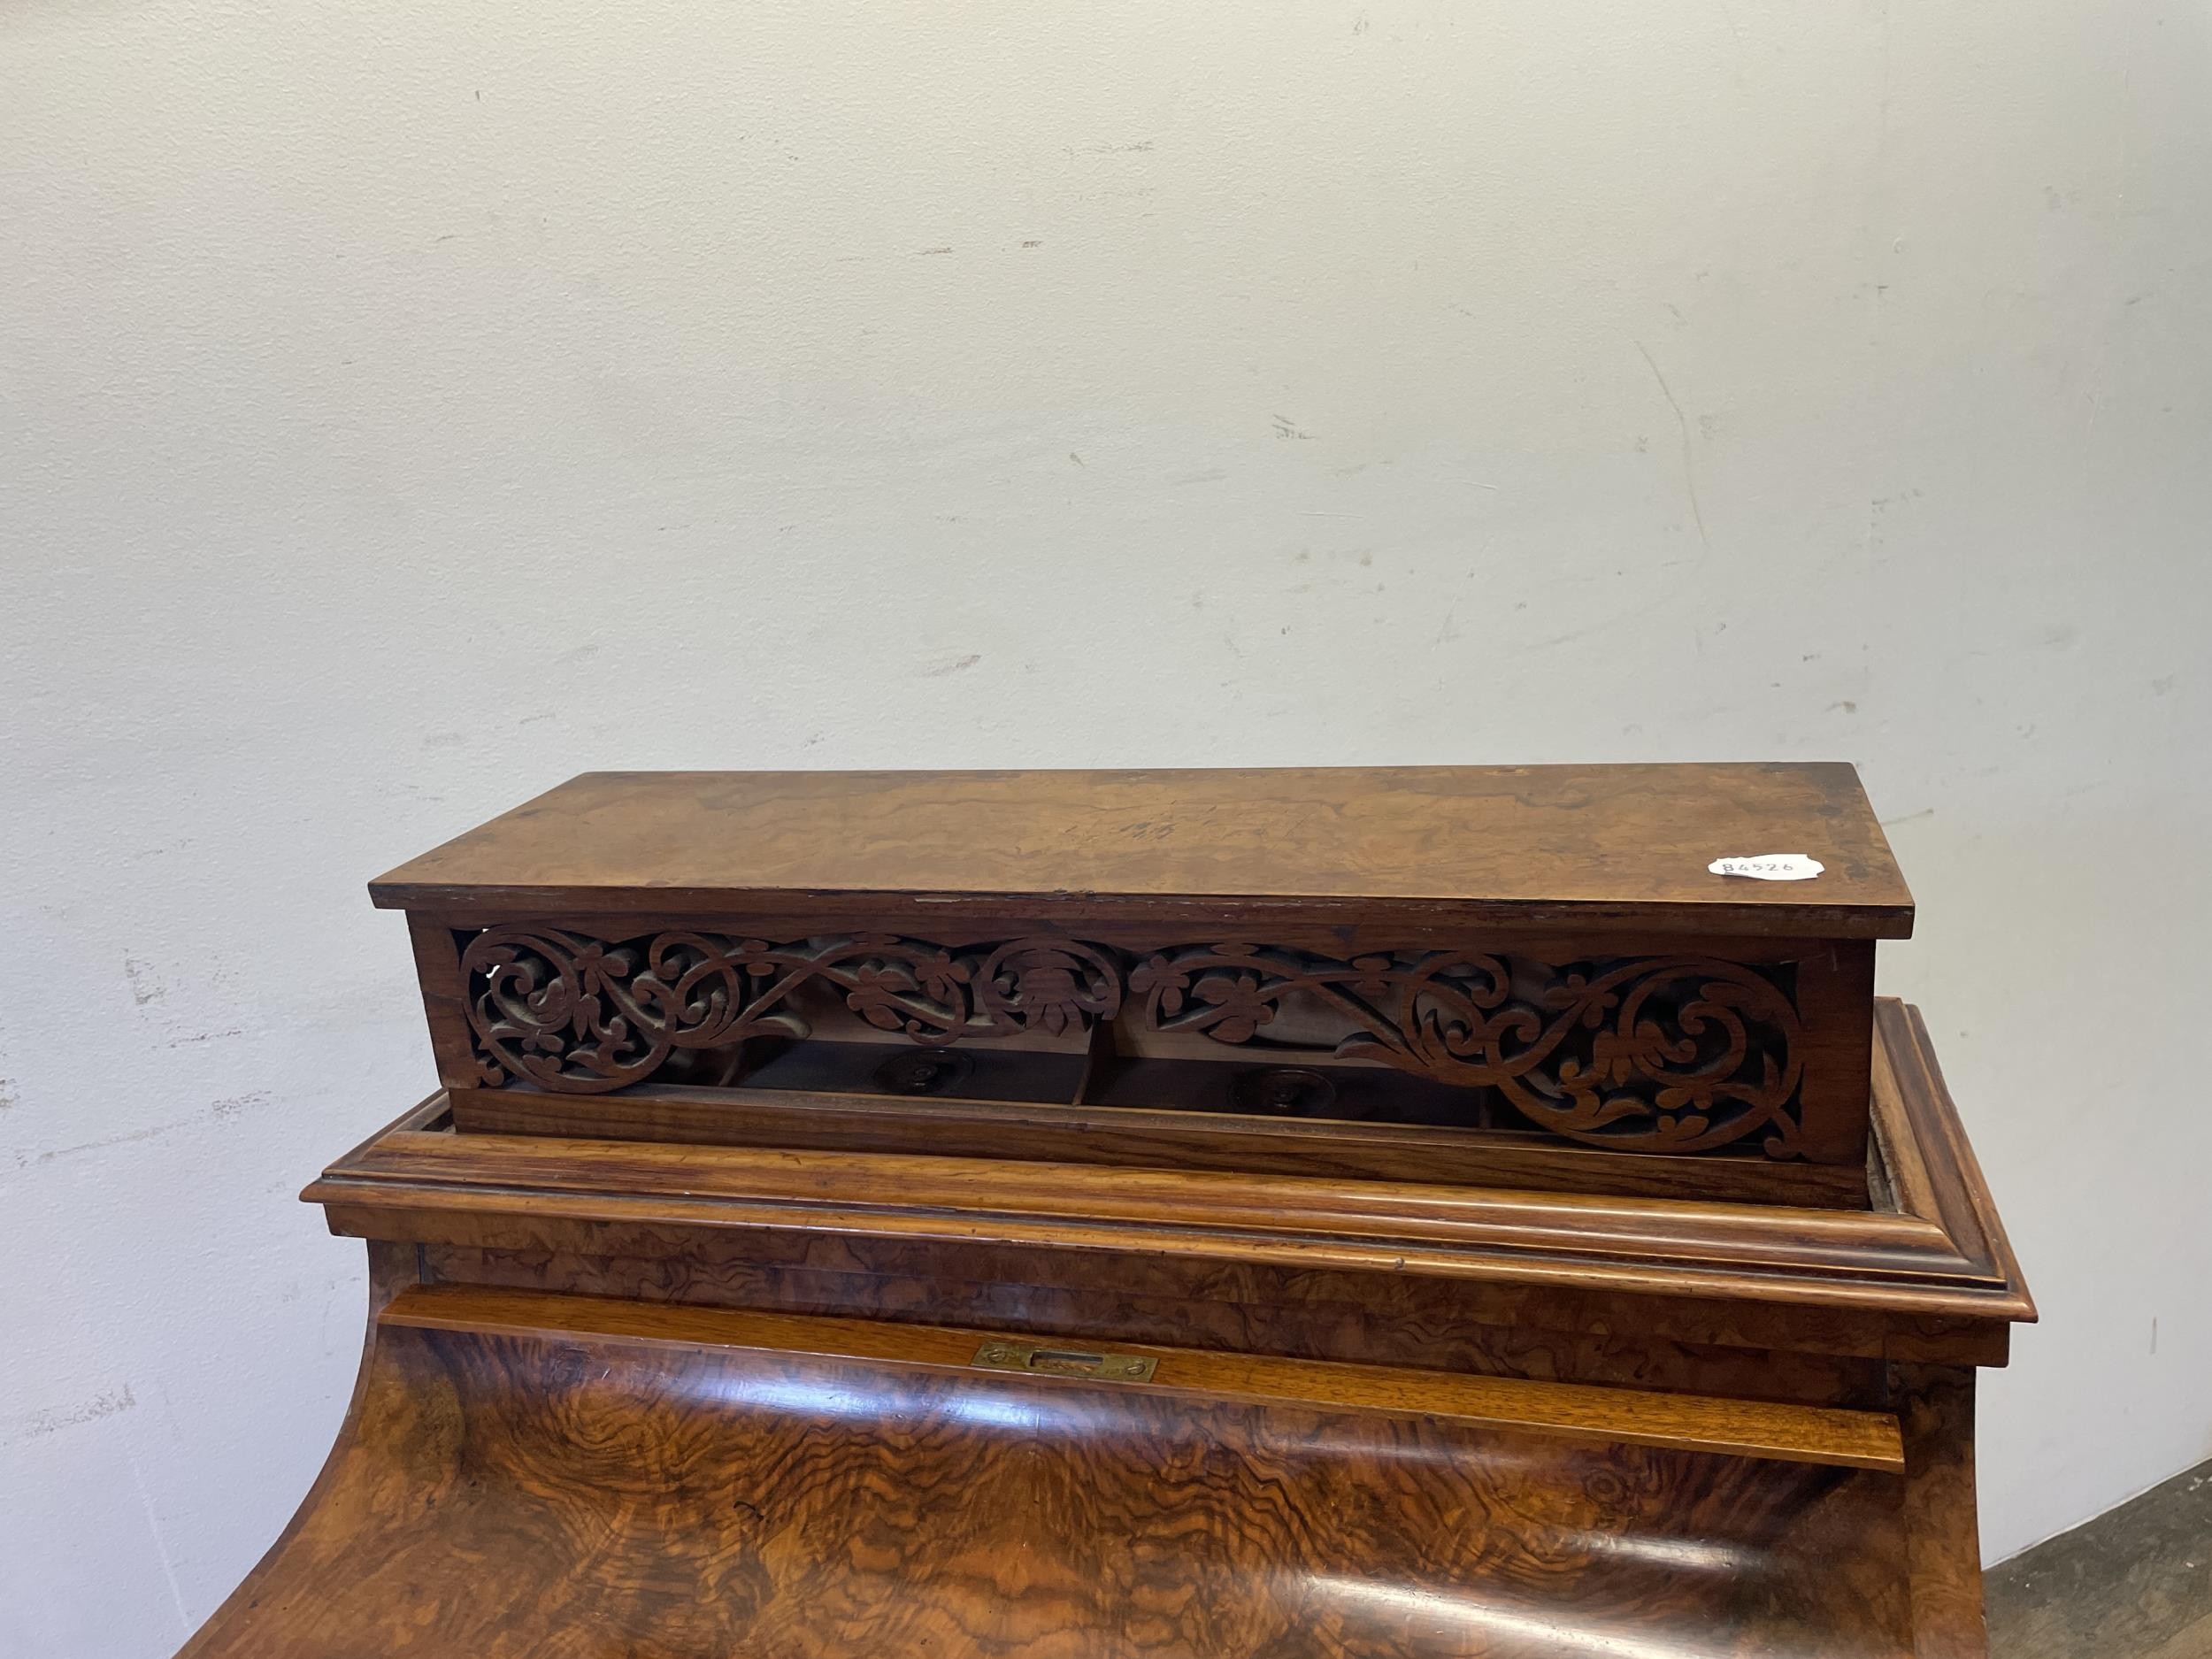 A 19th century walnut piano Davenport, with a rising superstructure, and hinged top to reveal a - Image 4 of 6